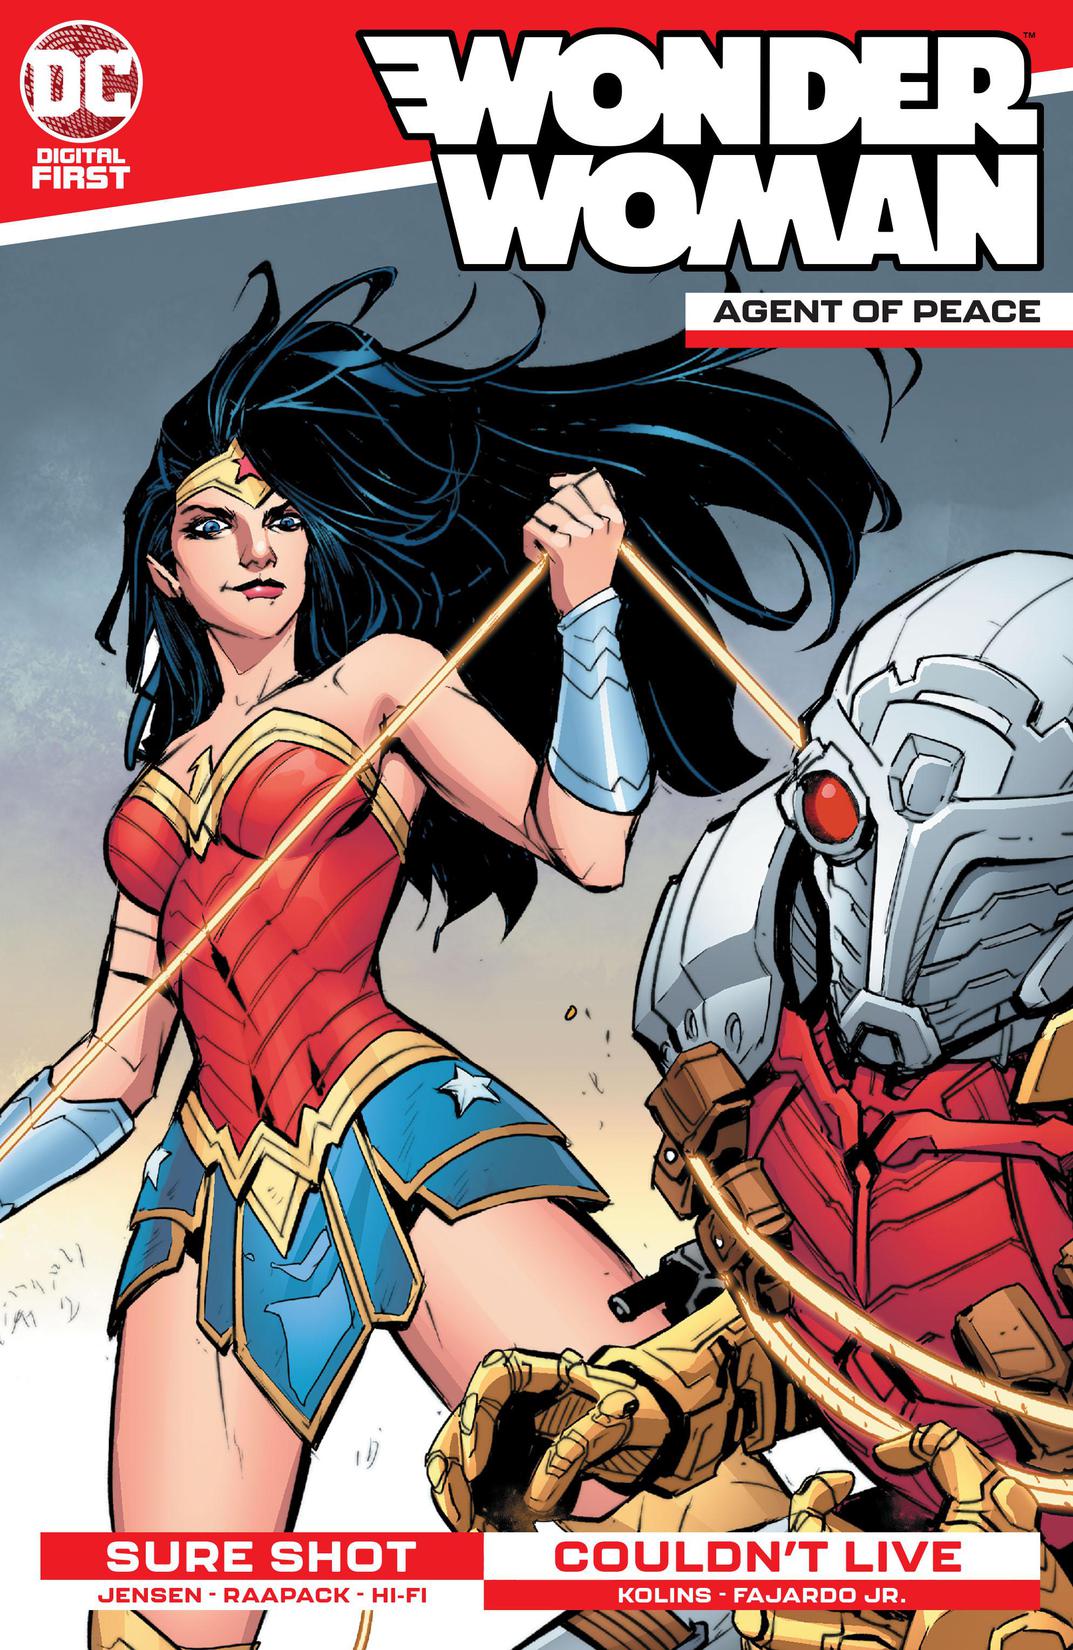 Wonder Woman: Agent of Peace #5 preview images